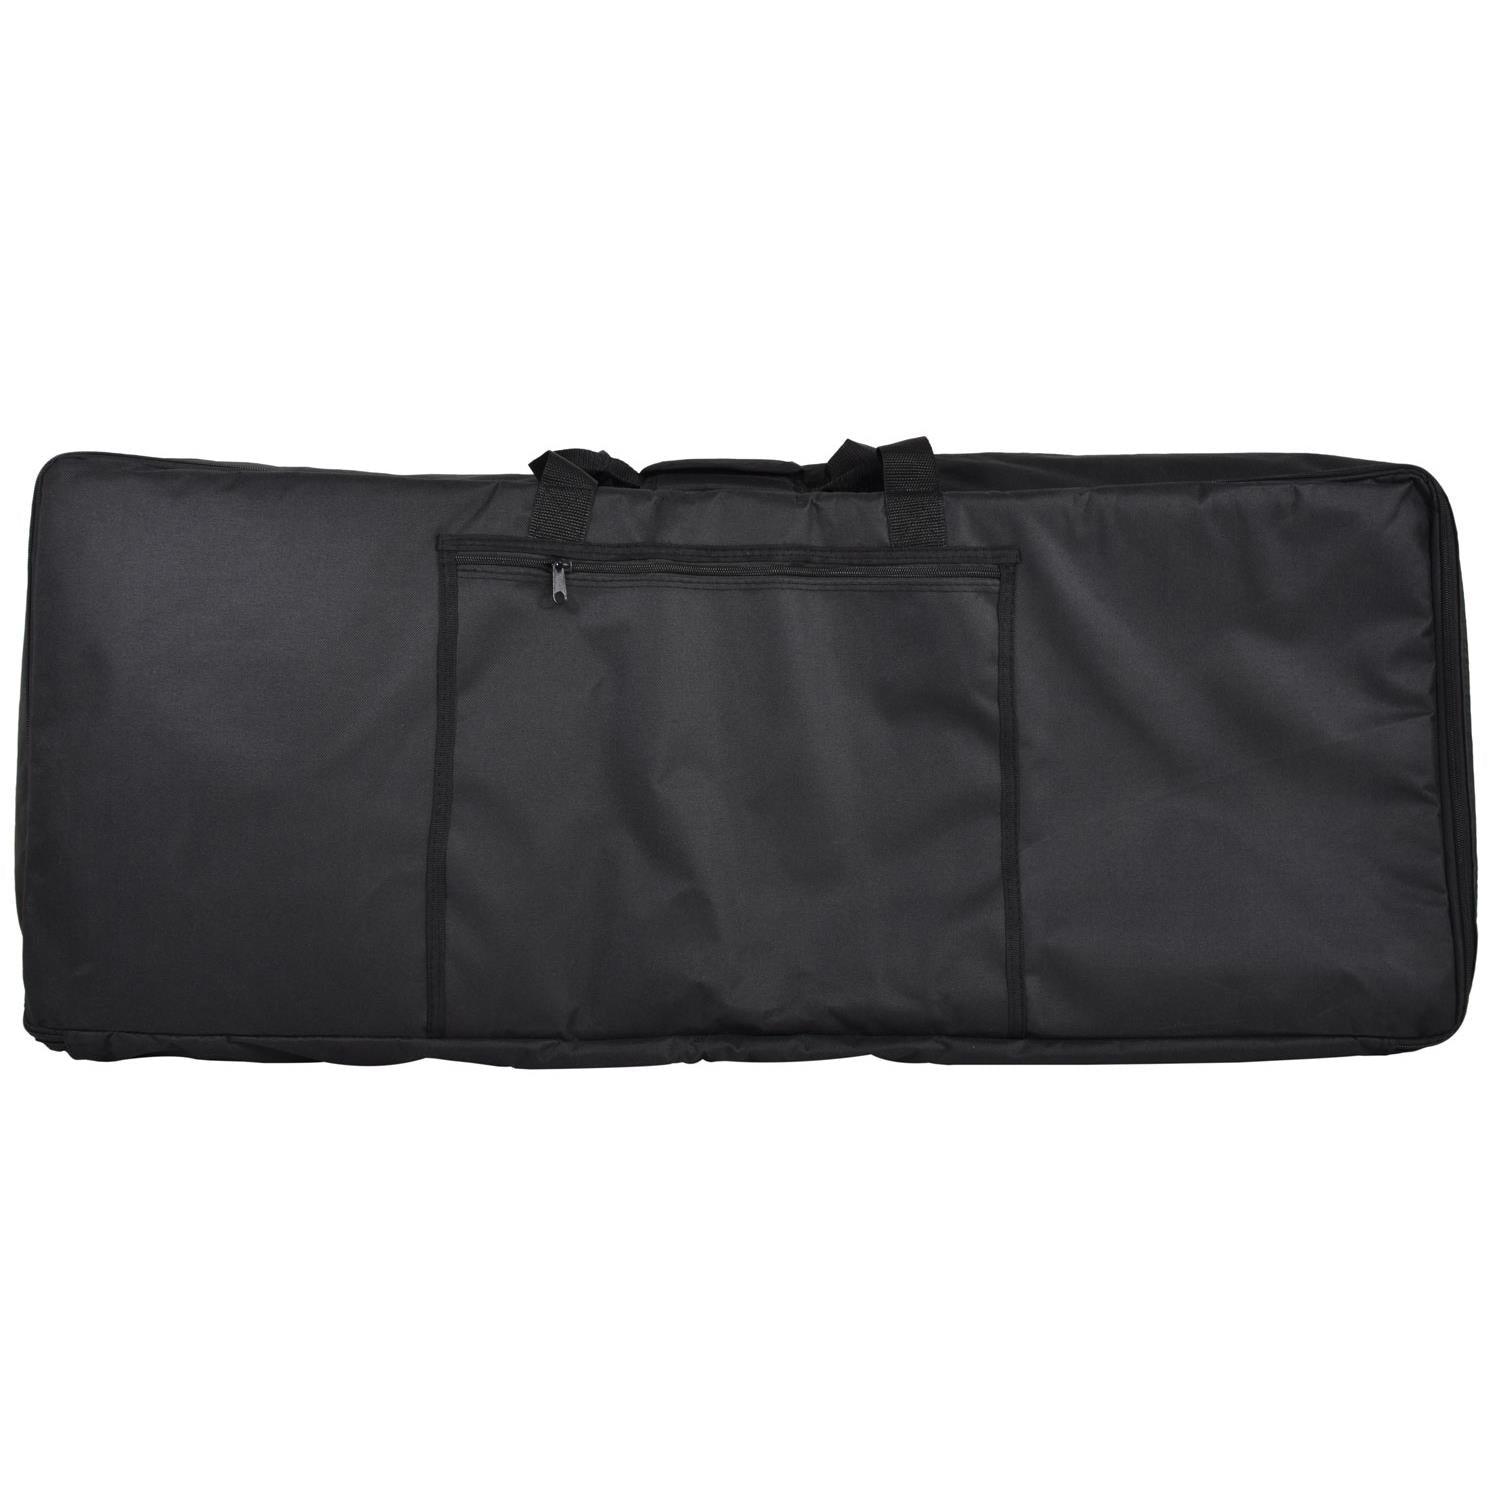 Chord 61 Key Keyboard Bag with Backpack Straps - DY Pro Audio